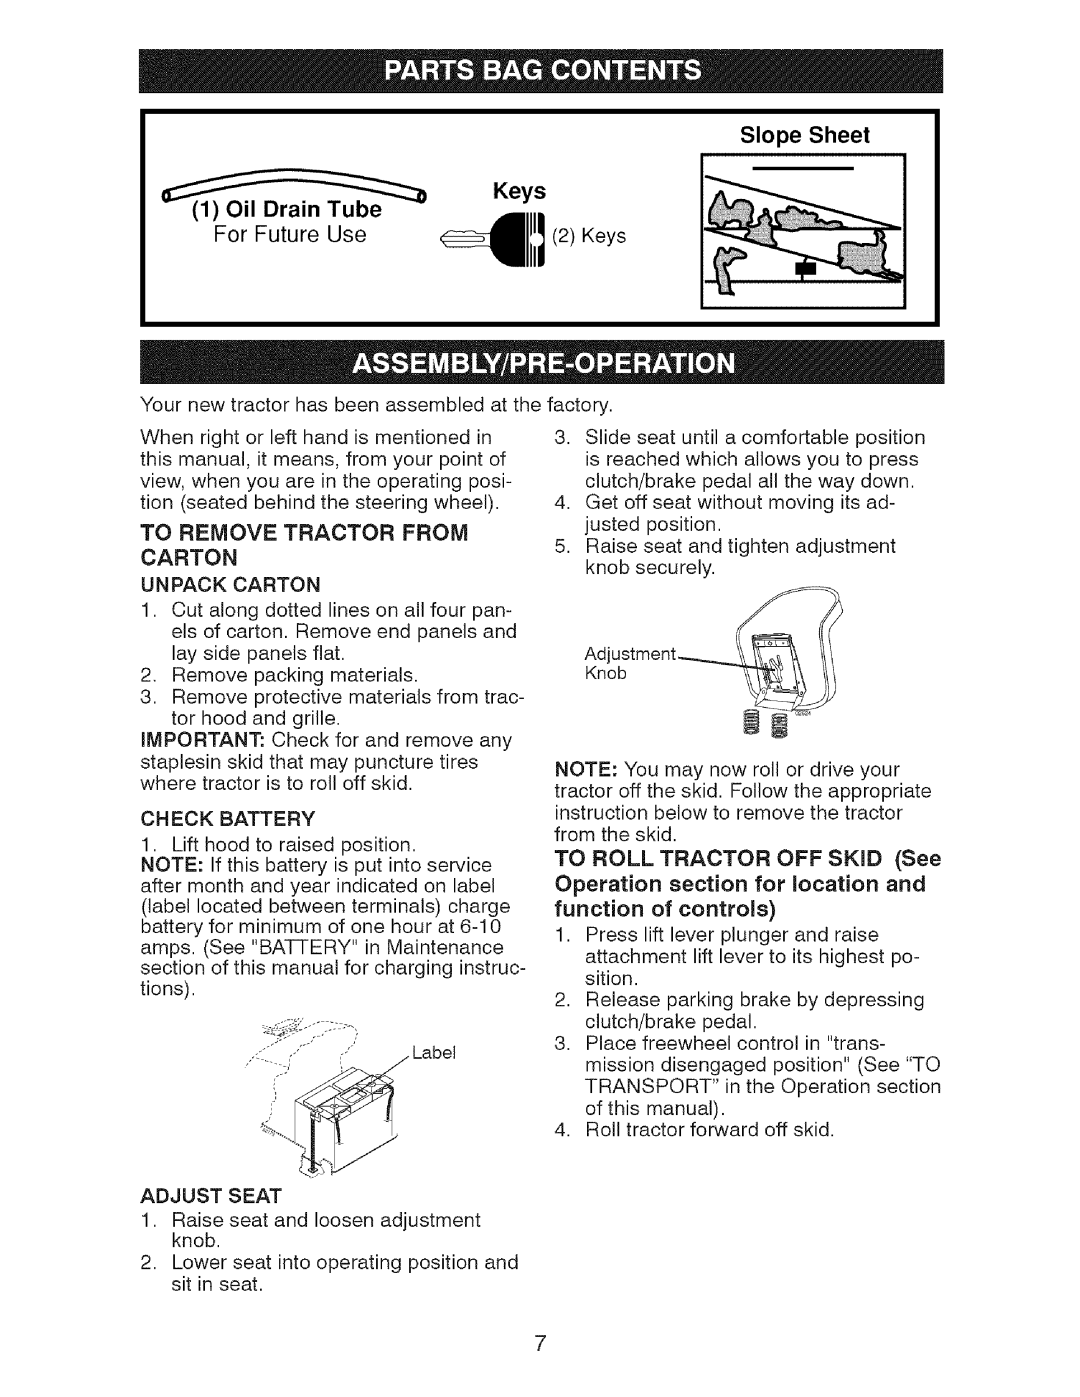 Craftsman 917.2759 manual JJ:l, Slope Sheet Keys, For Future Use, TO ROLL TRACTOR OFF SKiD See, function of controls 